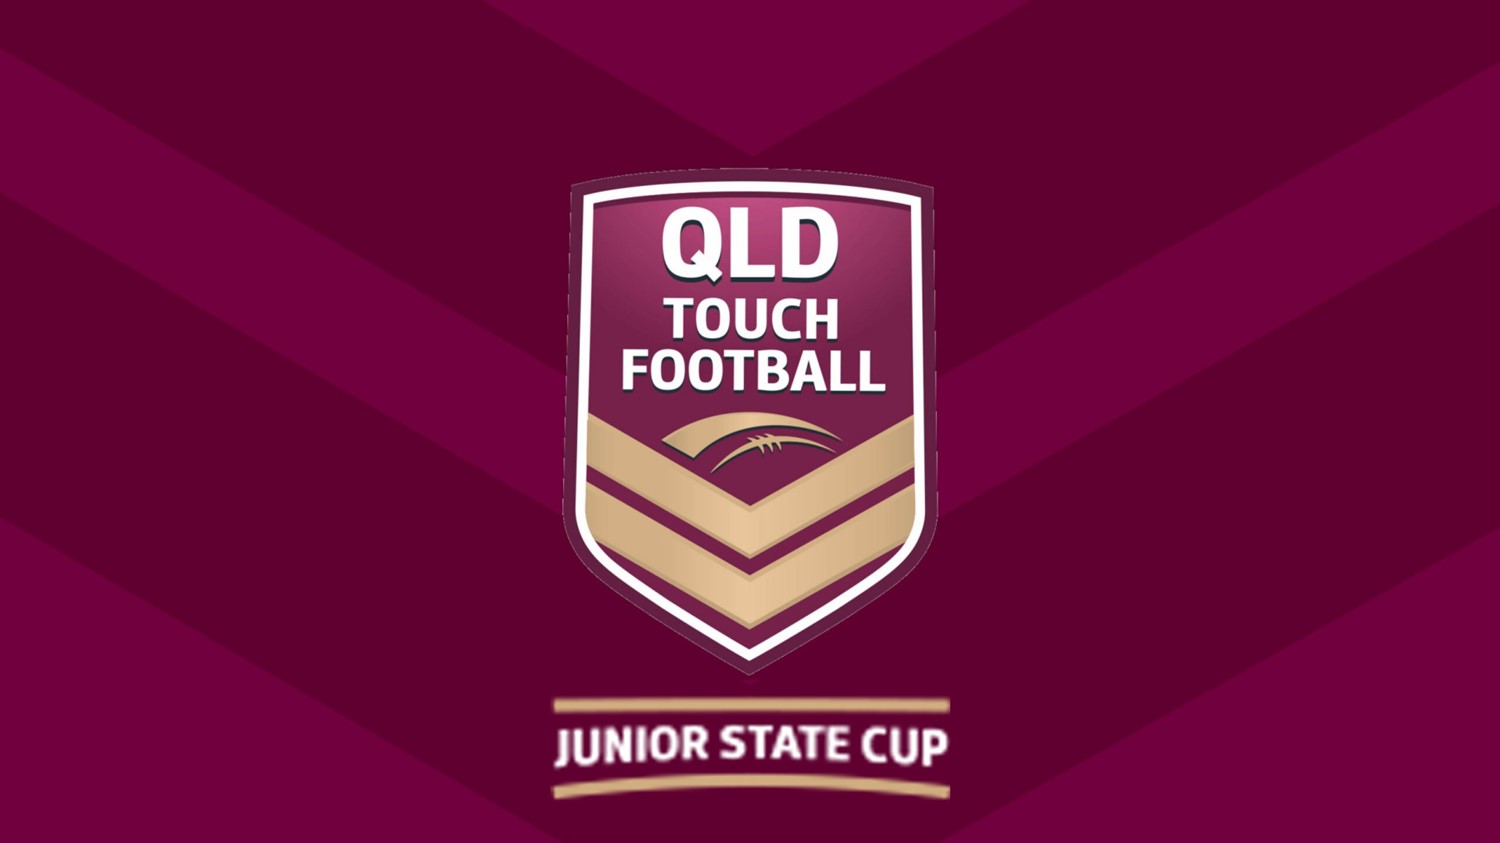 210709-QLD Junior State Cup 18 Girls - Caboolture v Childers Minigame Slate Image